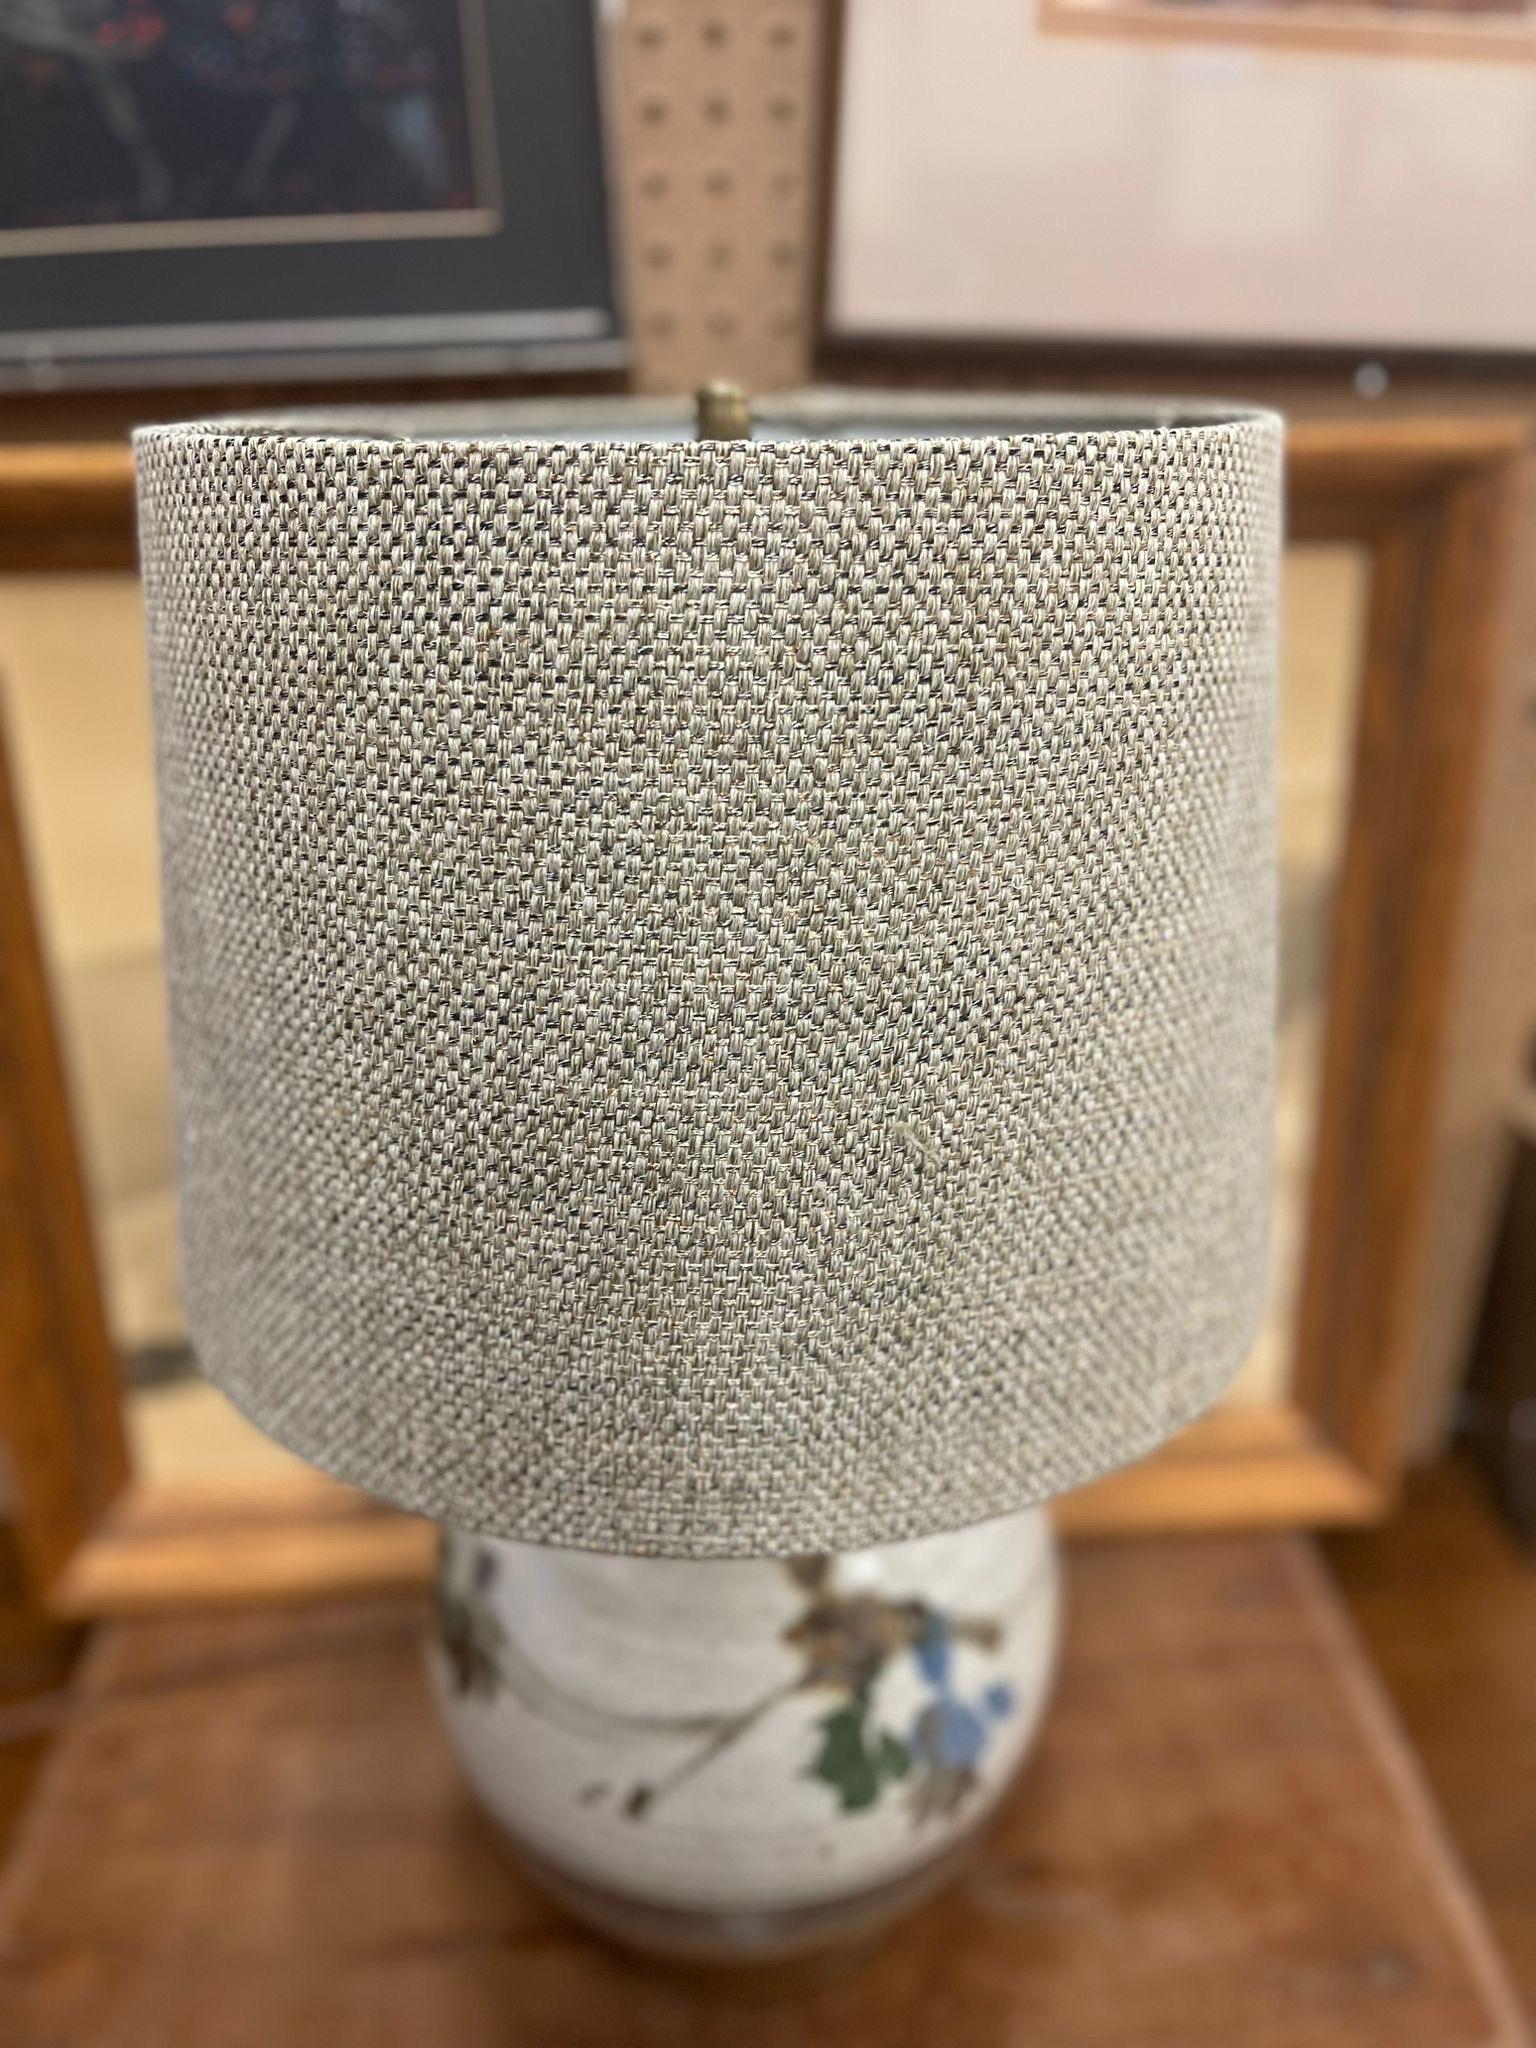 Ceramic Vintage Studio Pottery Lamp With Fabric Shade. Circa 1970s. For Sale